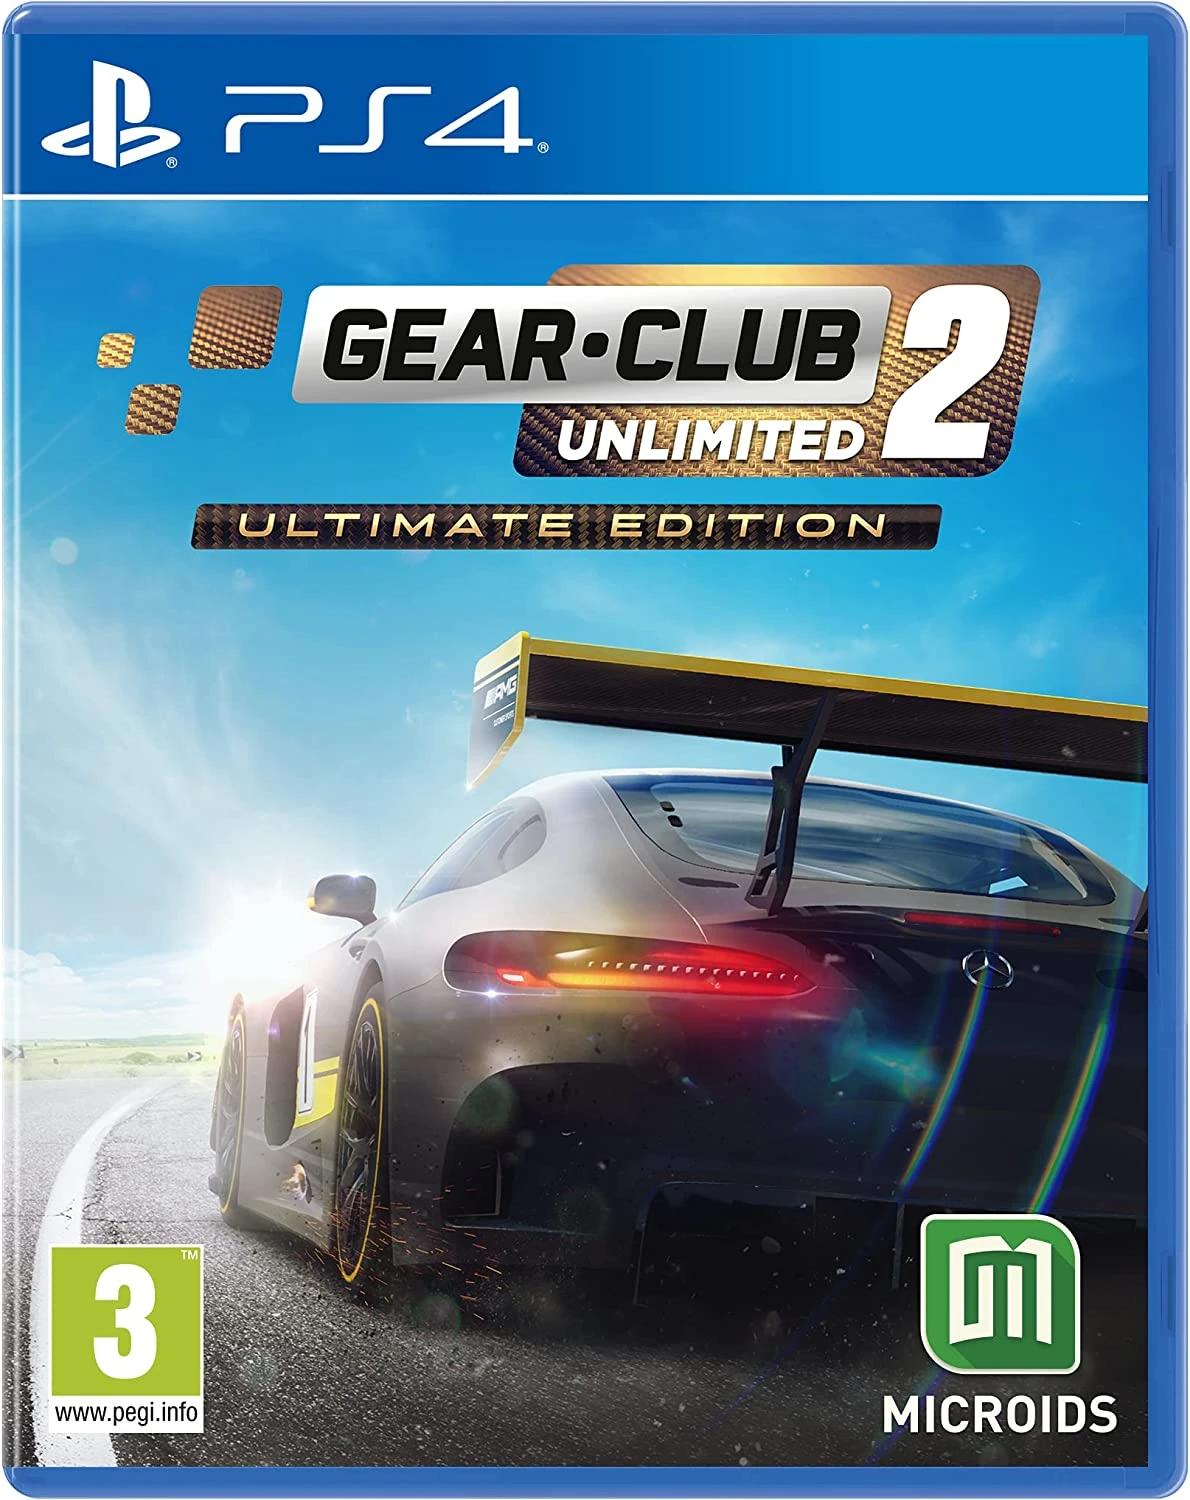 Geart Club Unlimited 2 - Ultimate Edition